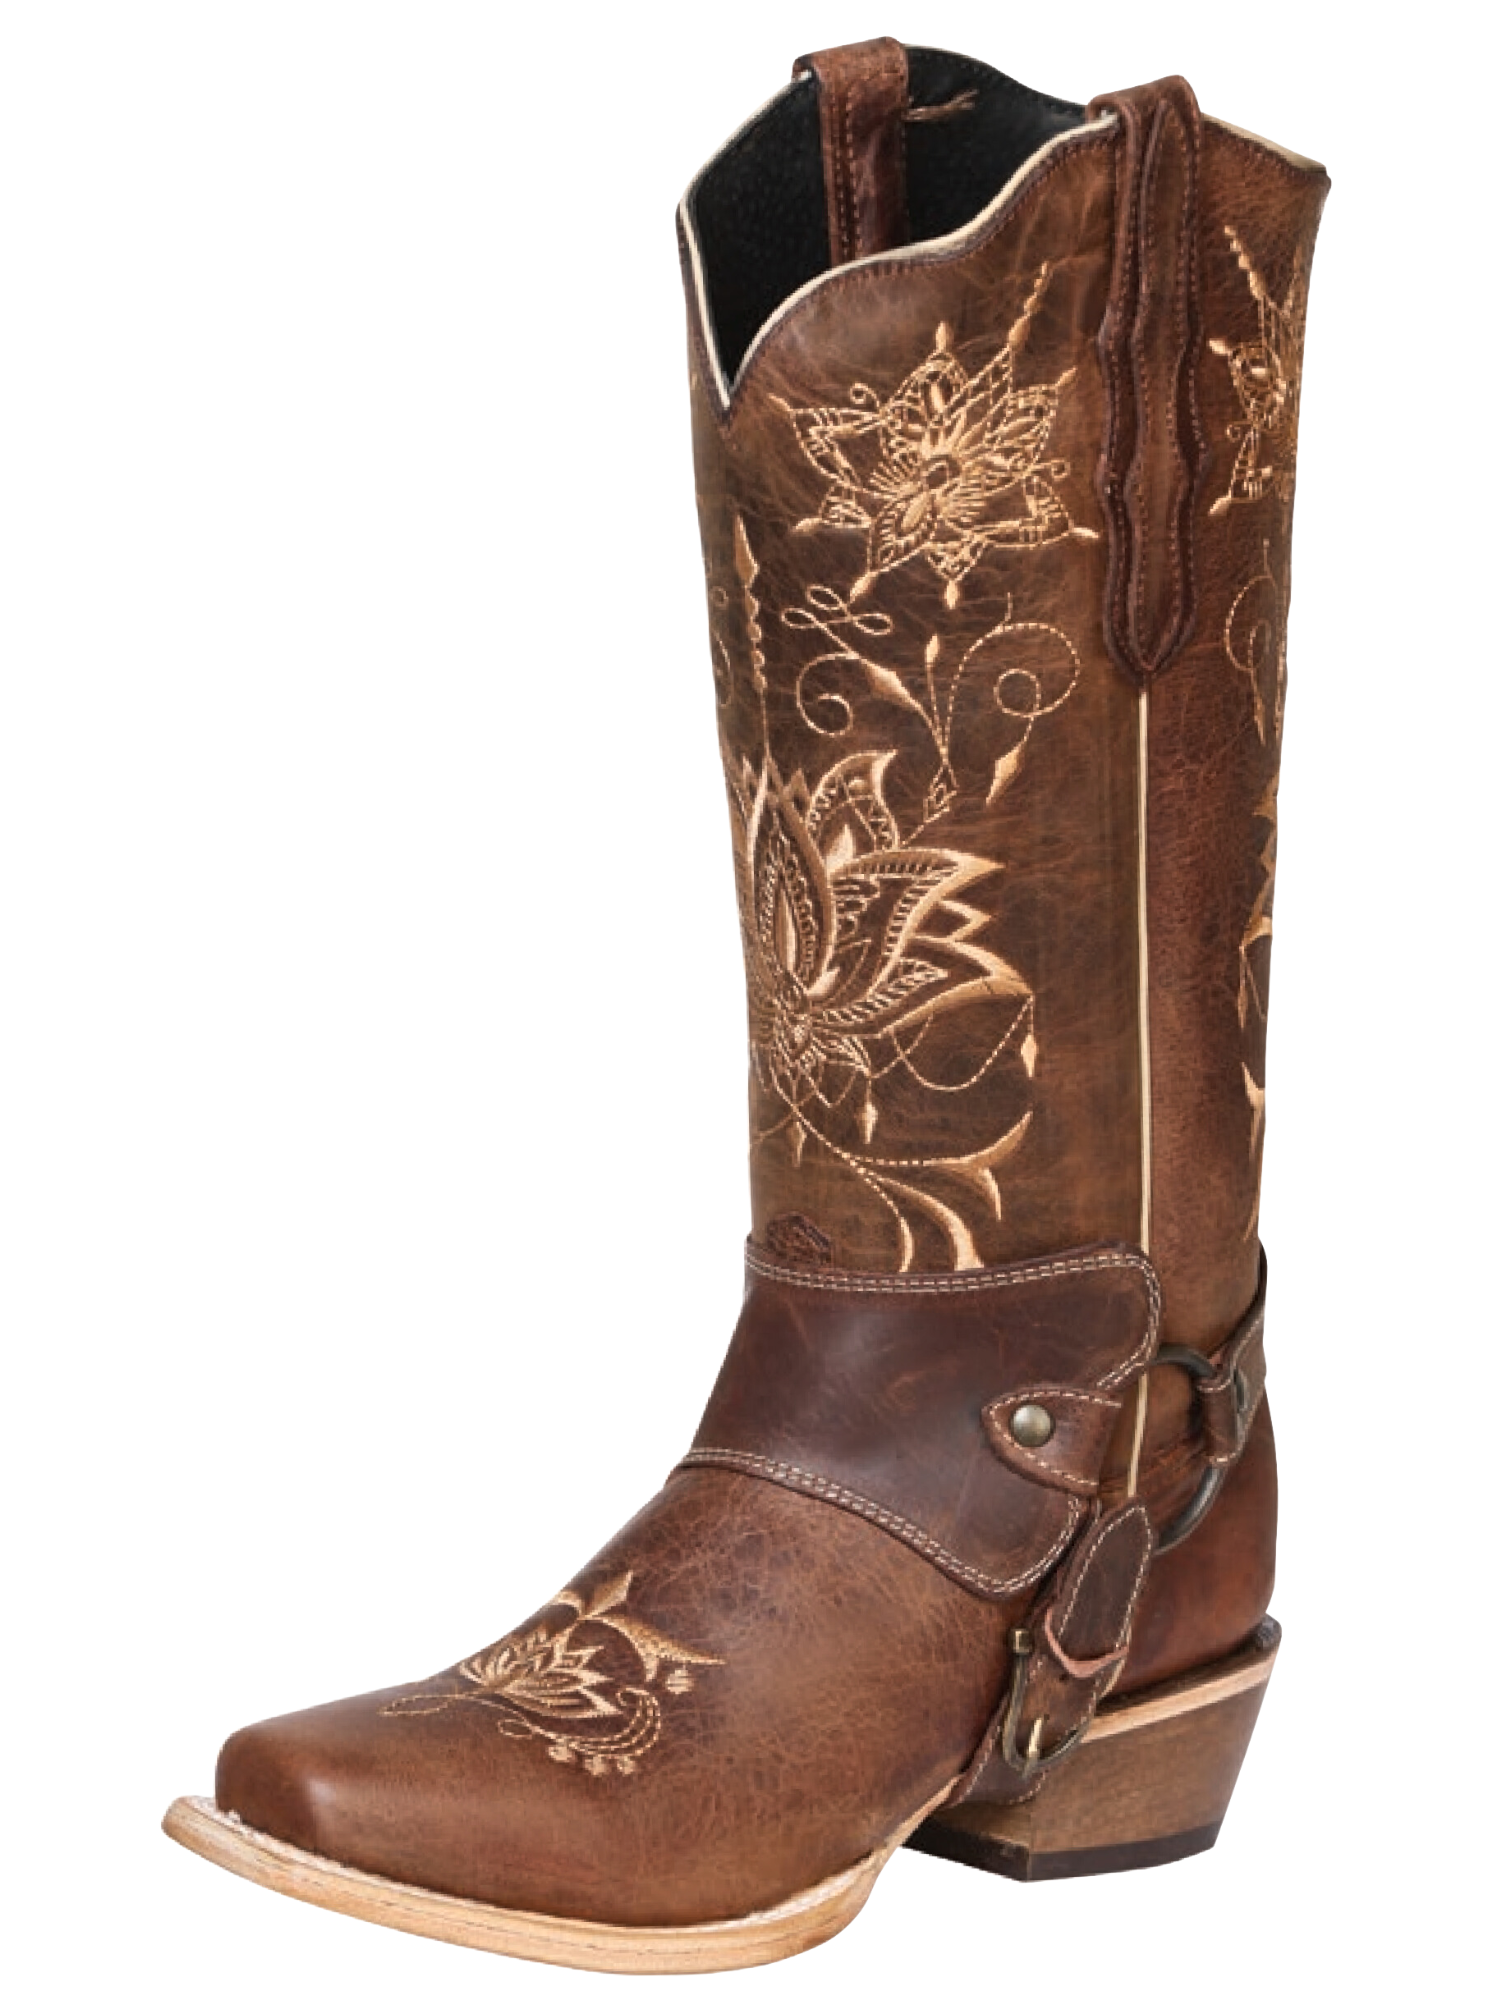 WOMENS COWGIRL Cowboy Square Toe Leather Western Embroidered BOOTS 